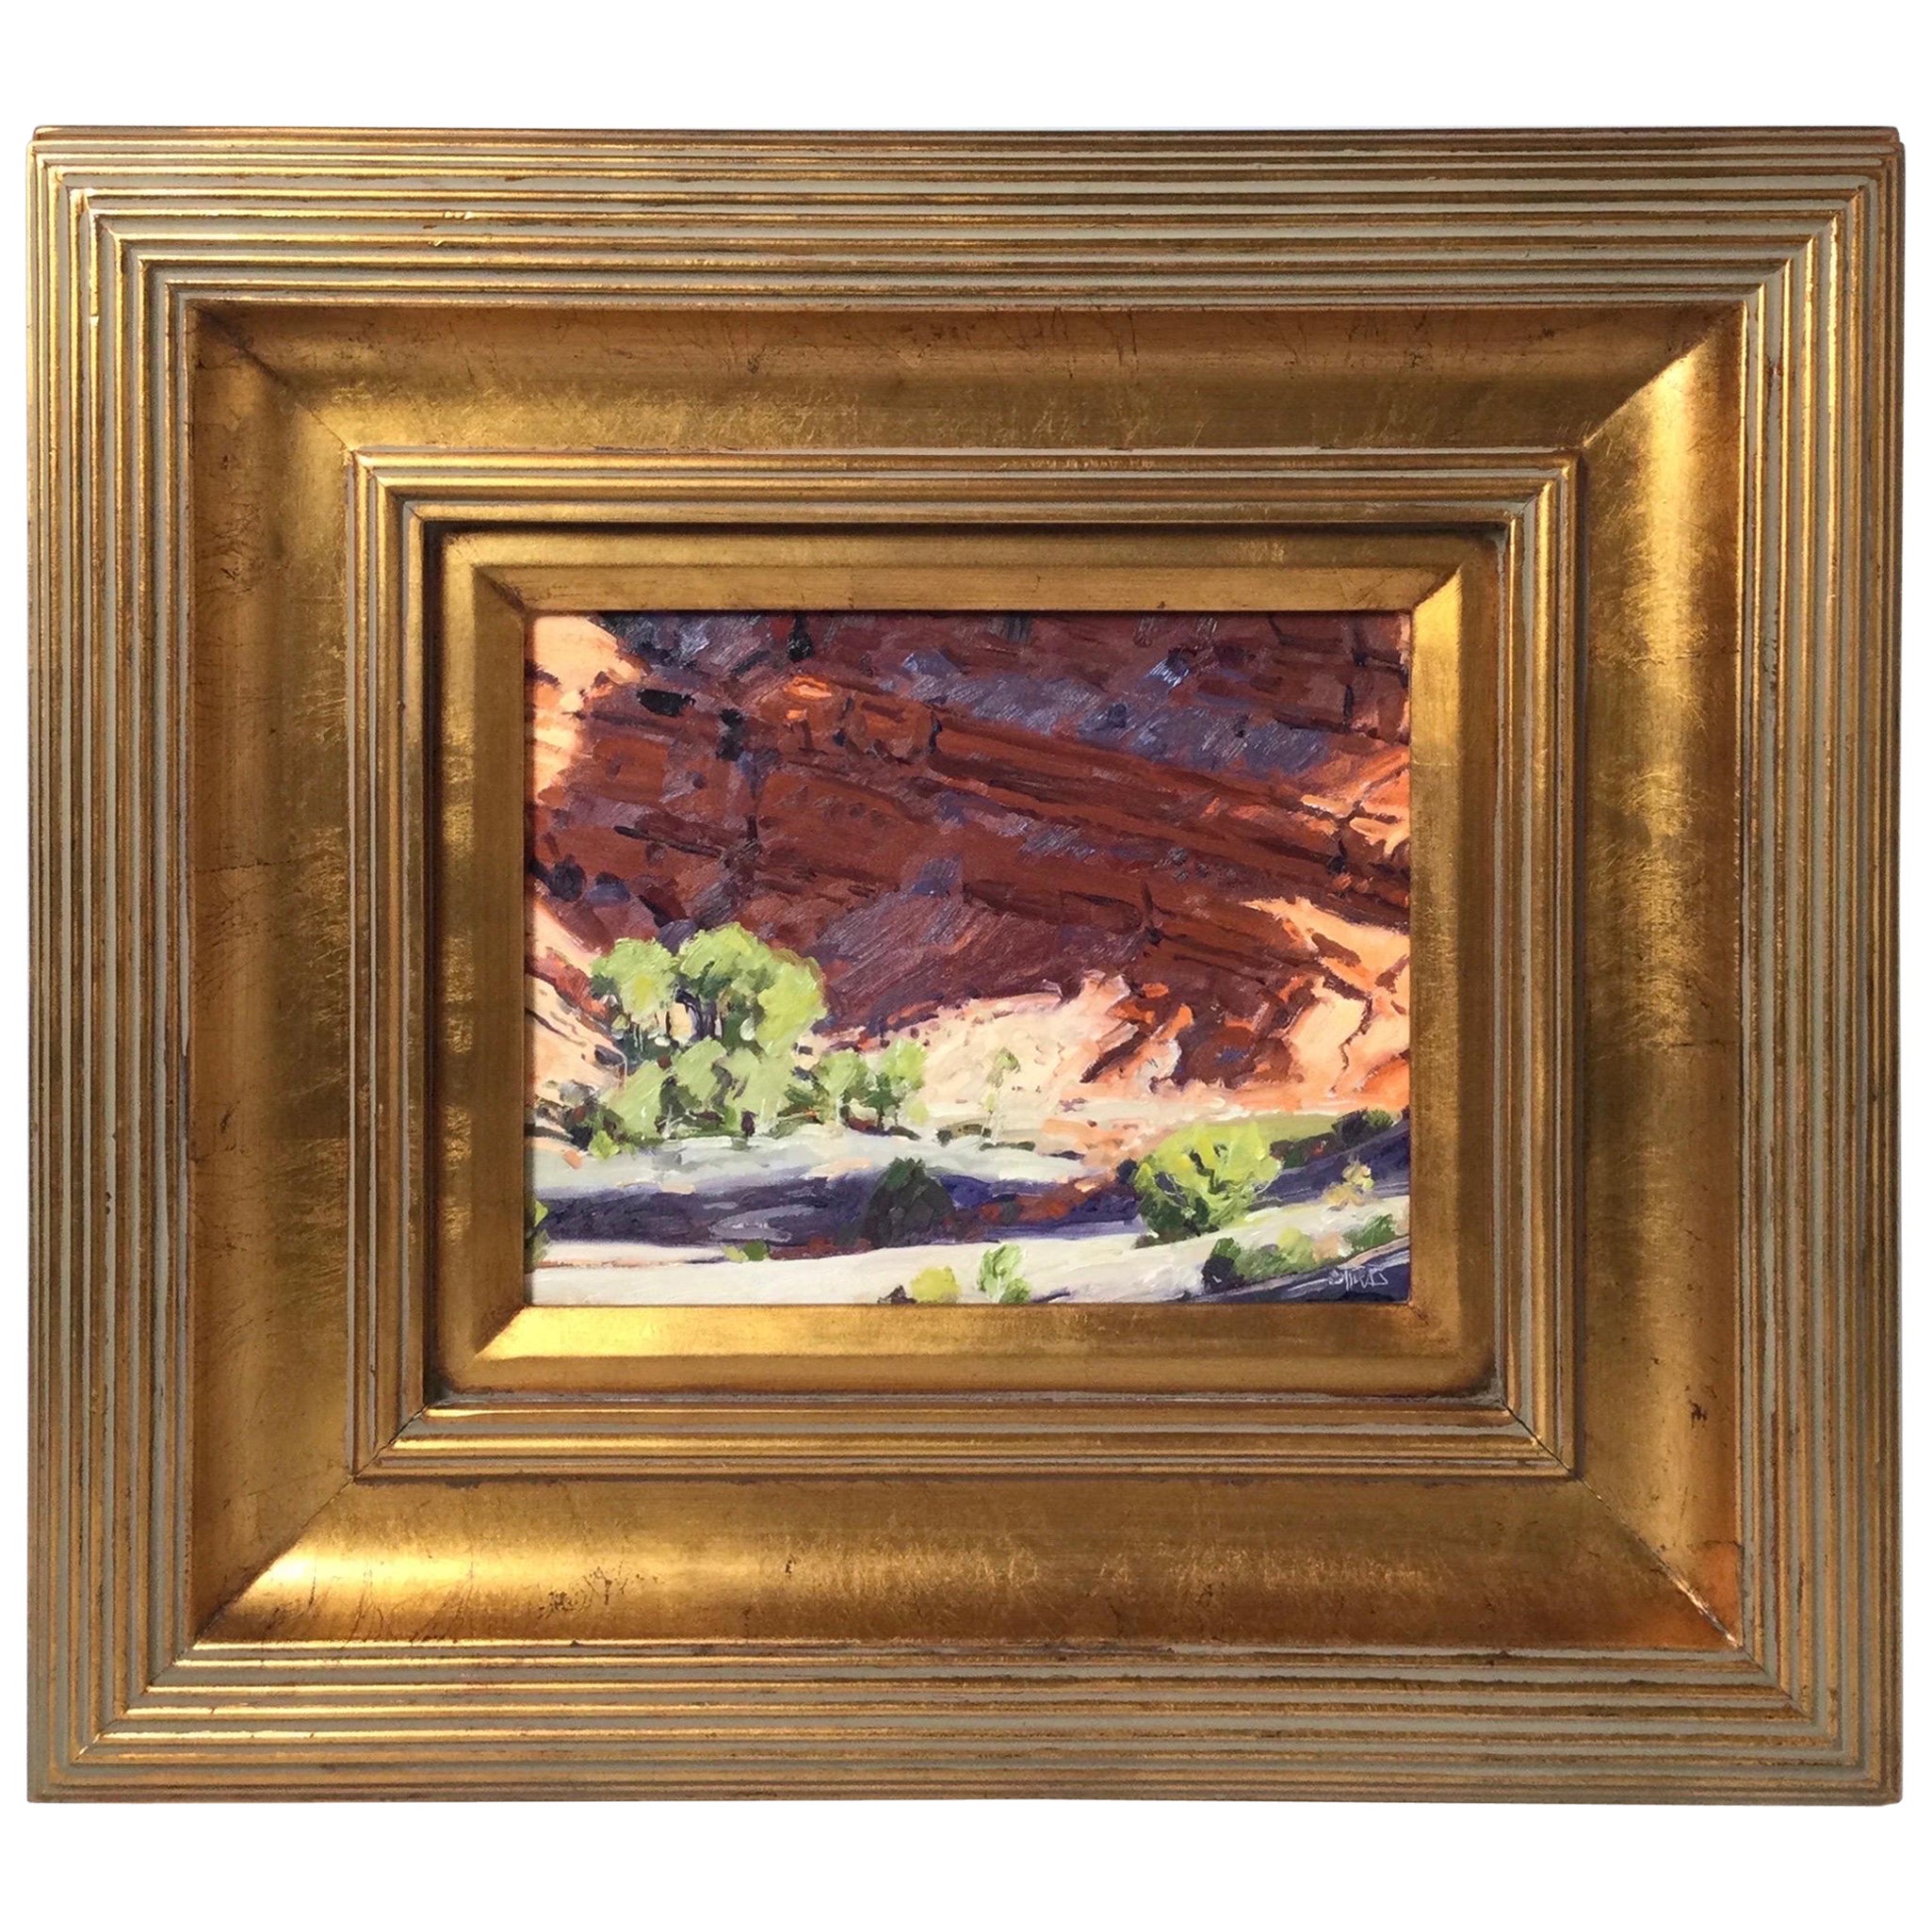 Oil on Canvas Board Titled "The Canyon Wall" in Giltwood Frame